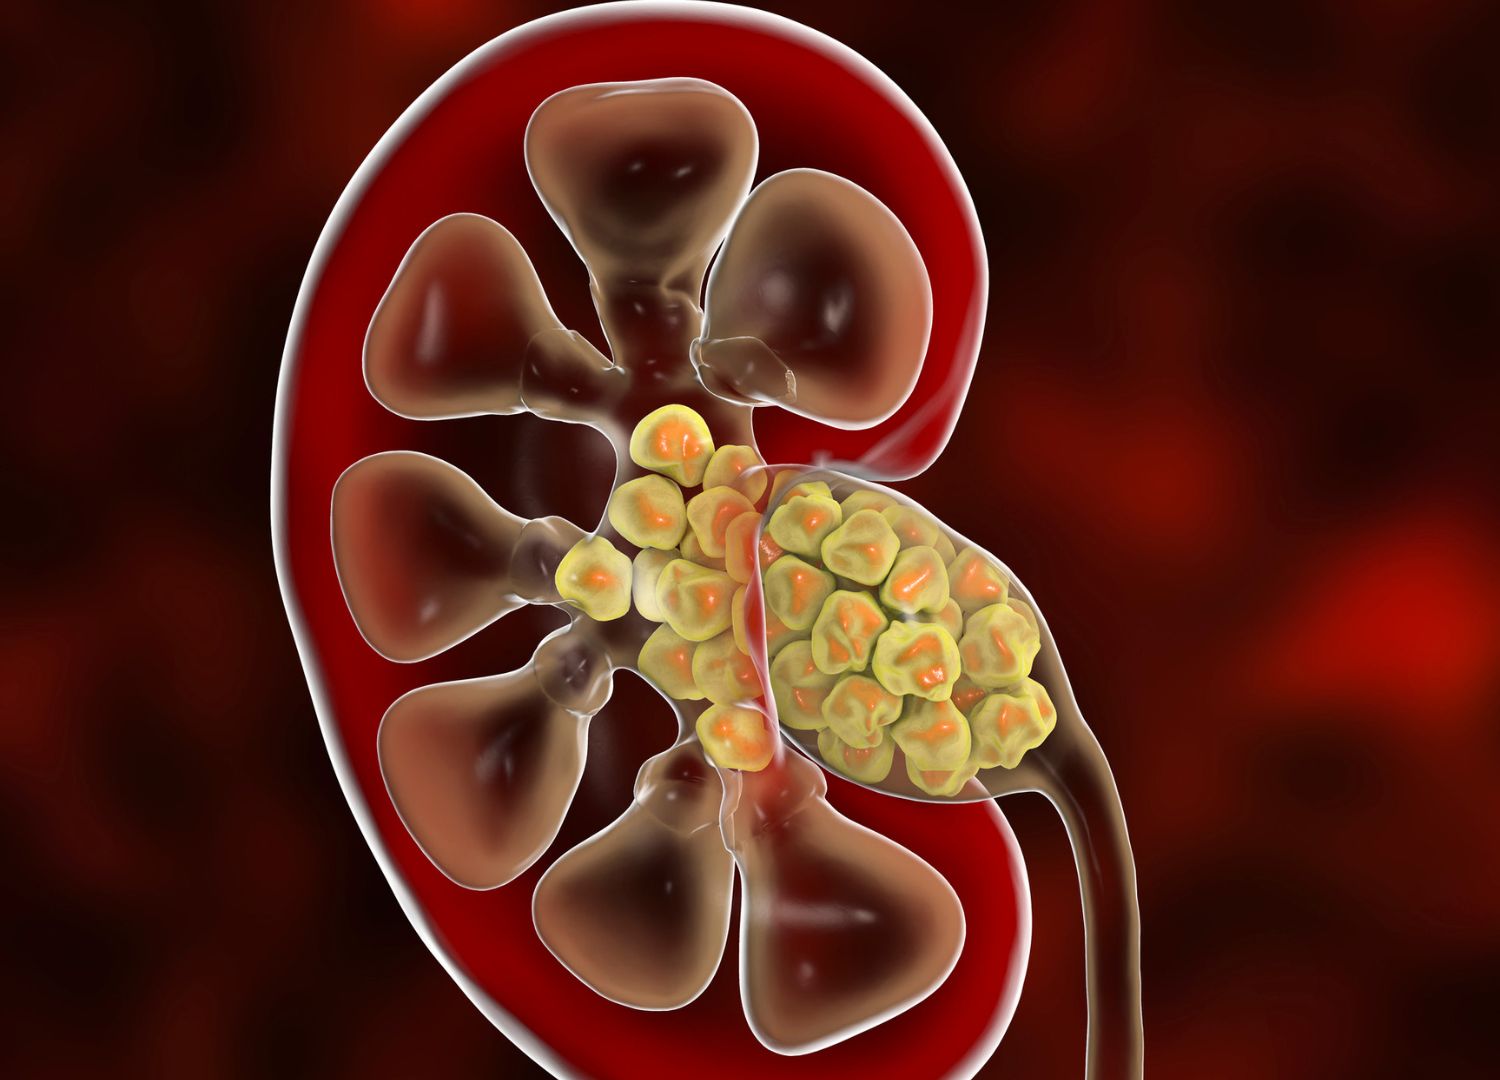 Urinary tract obstruction